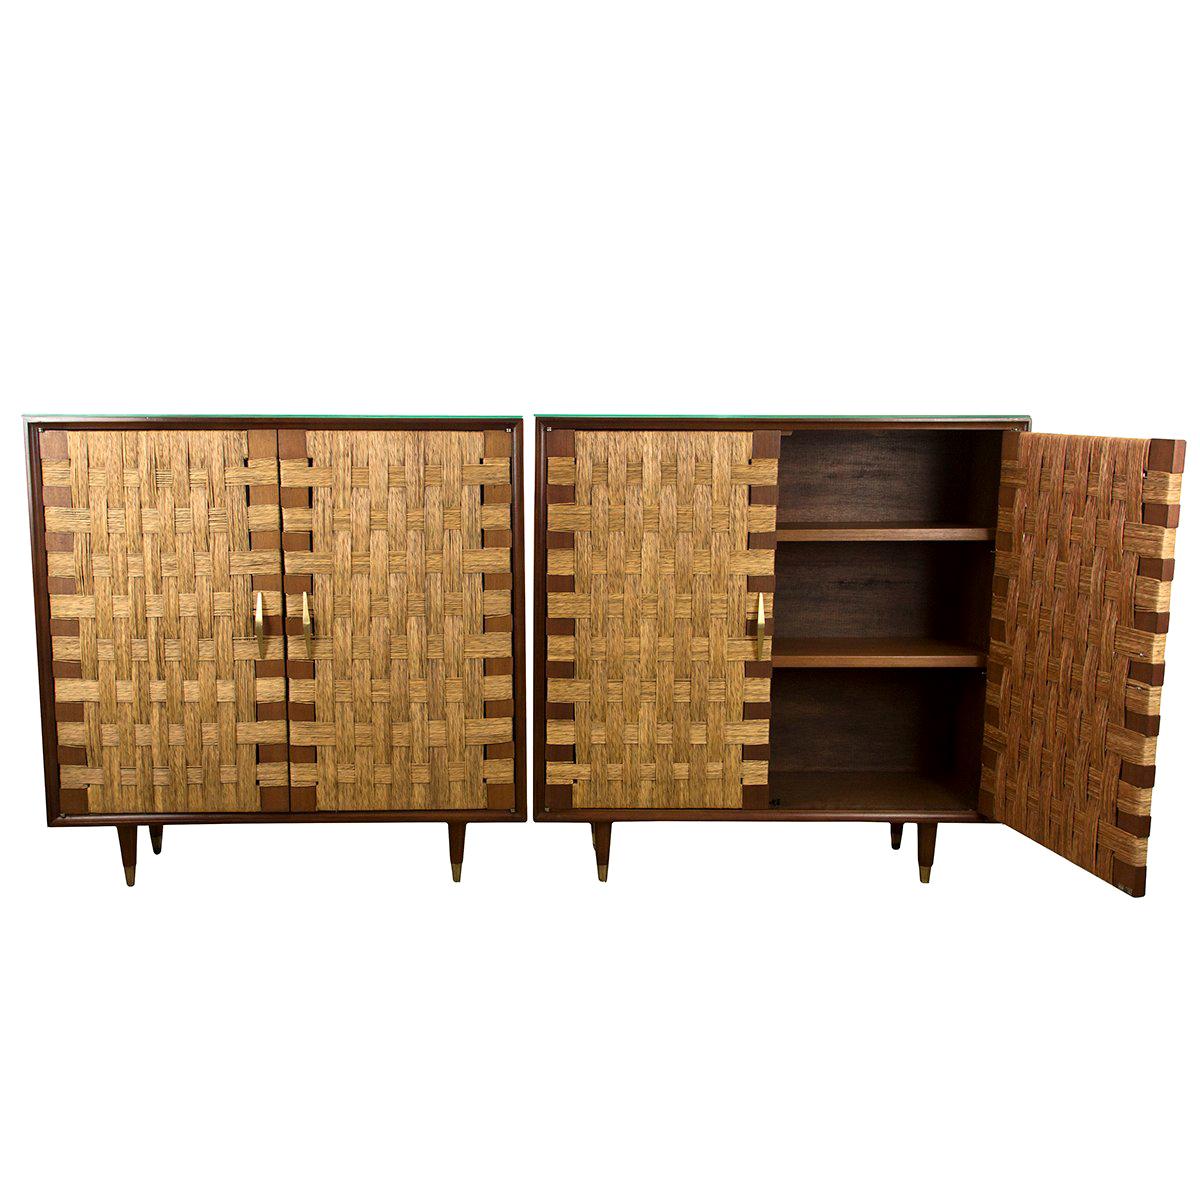 Pair of Maple and Woven Cane Cabinets with Interior Shelves, by Edmund Spence